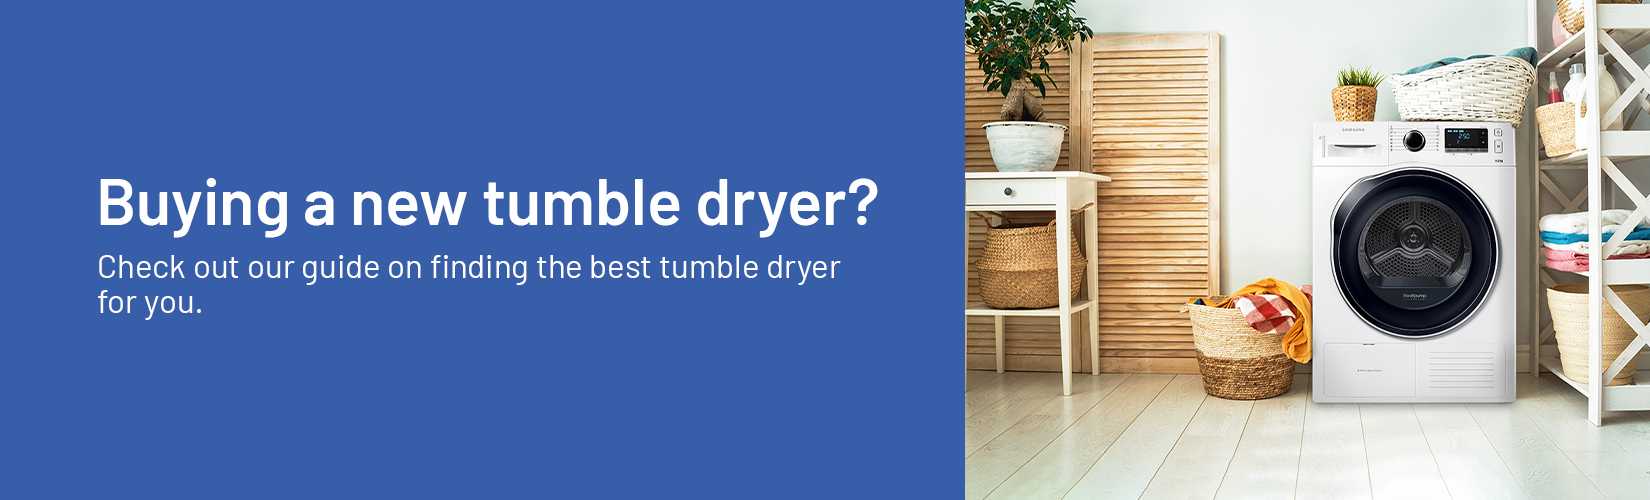 Buying a new tumble dryer? Check out our guide on finding the best tumble dryer for you.